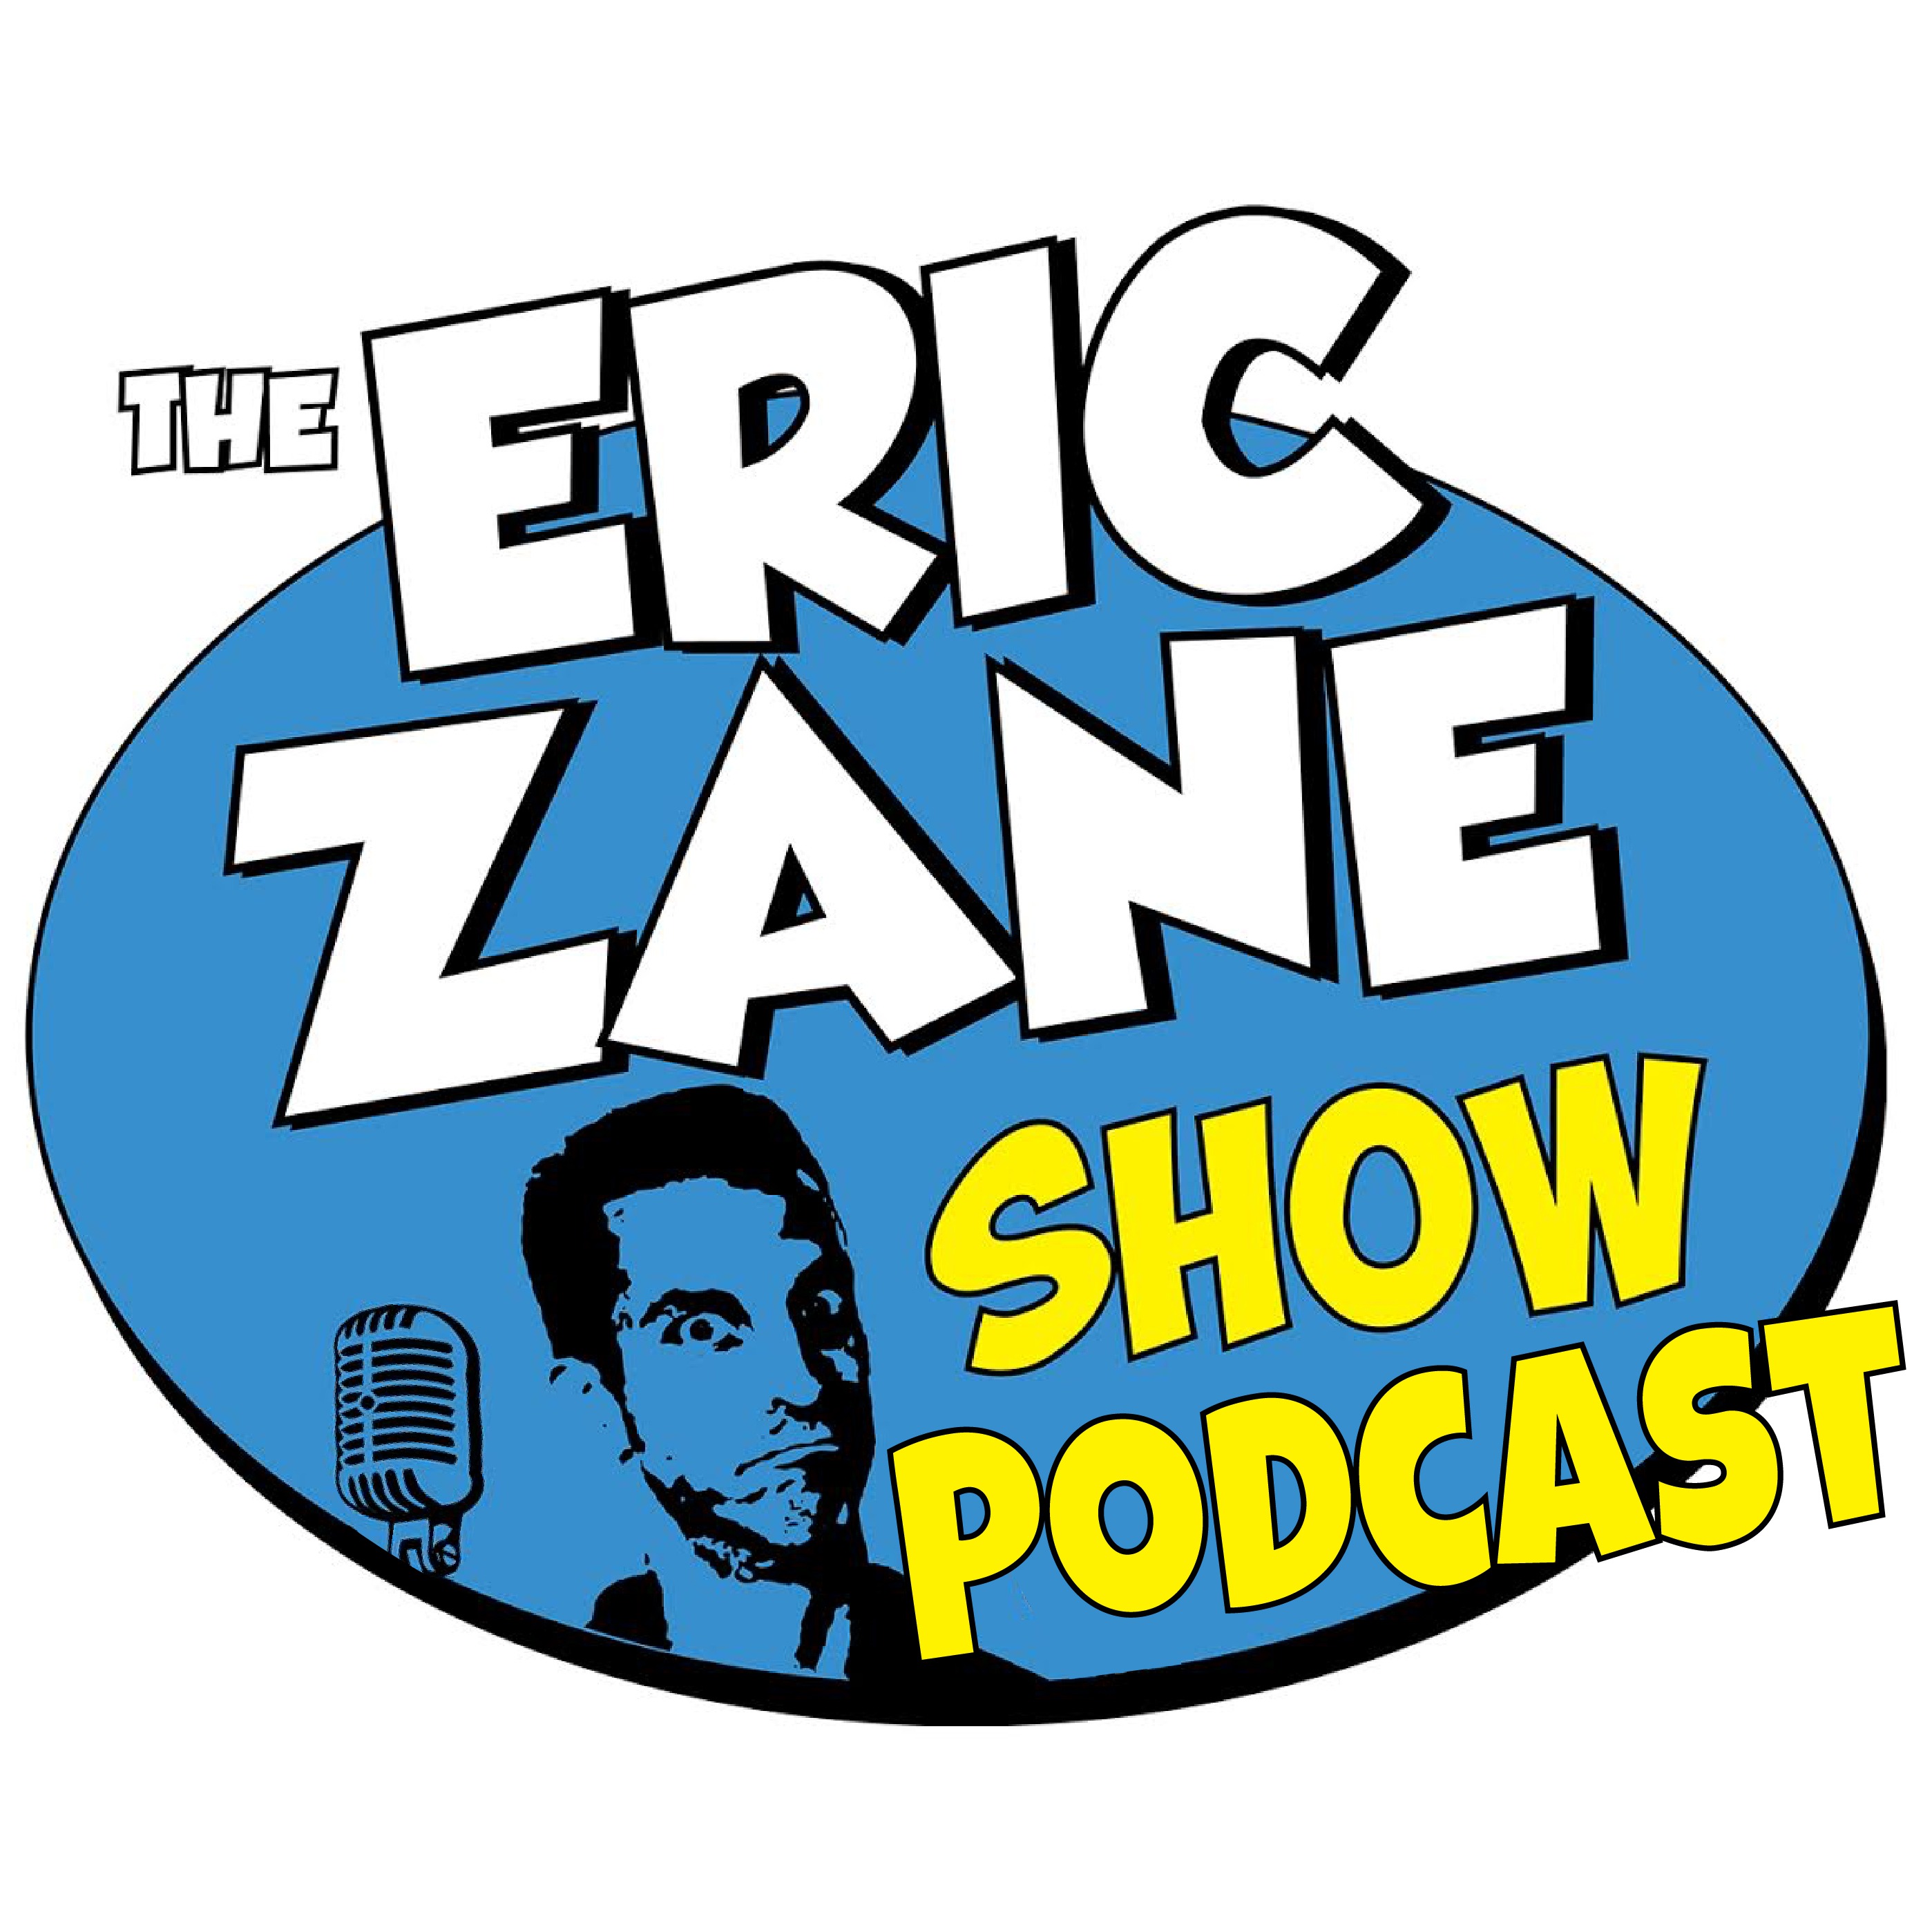 Eric Zane Show Podcast Ep 991 - Rodeo needs to be banned